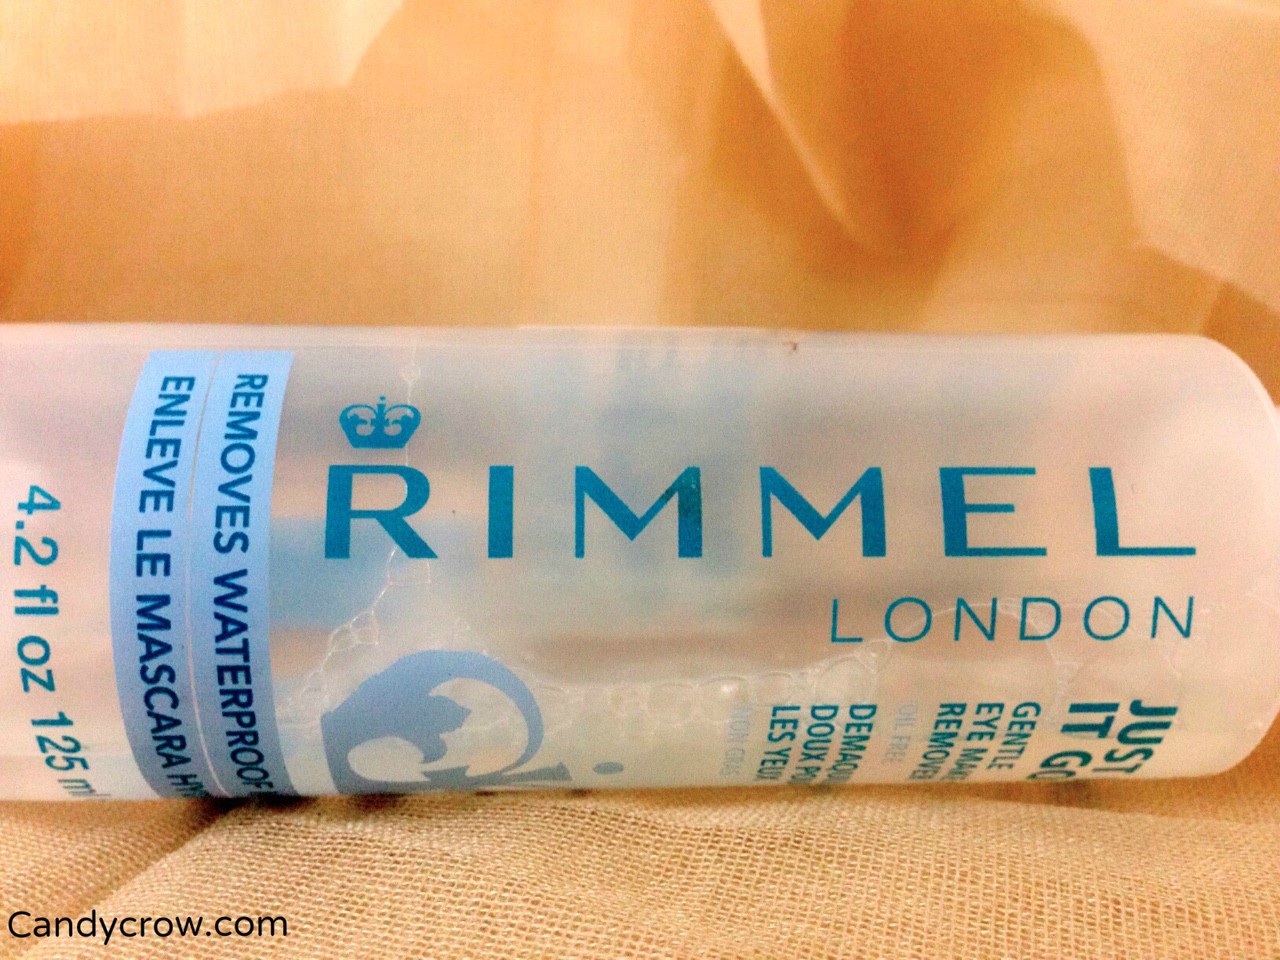 Rimmel London Just let it go... Gentle oil free eye makeup remover review.'